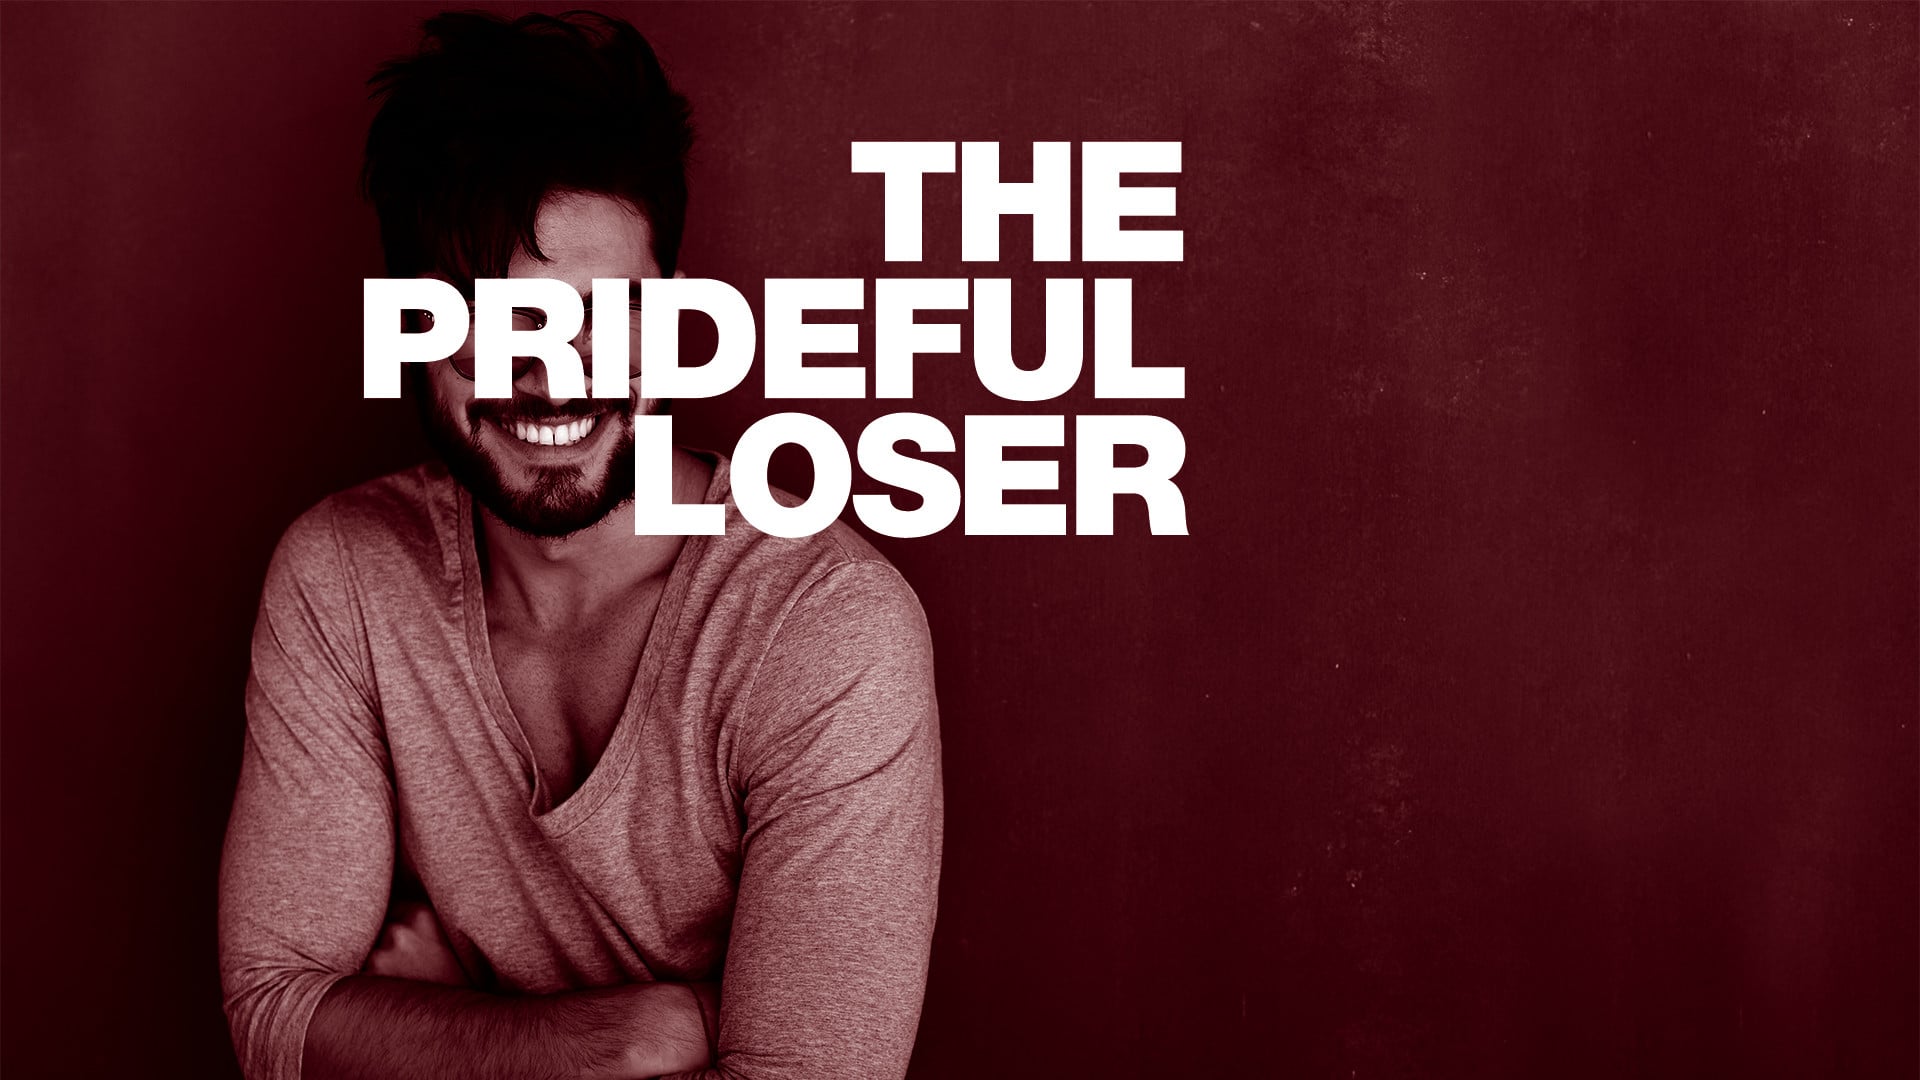 Featured image for “The Prideful Loser”